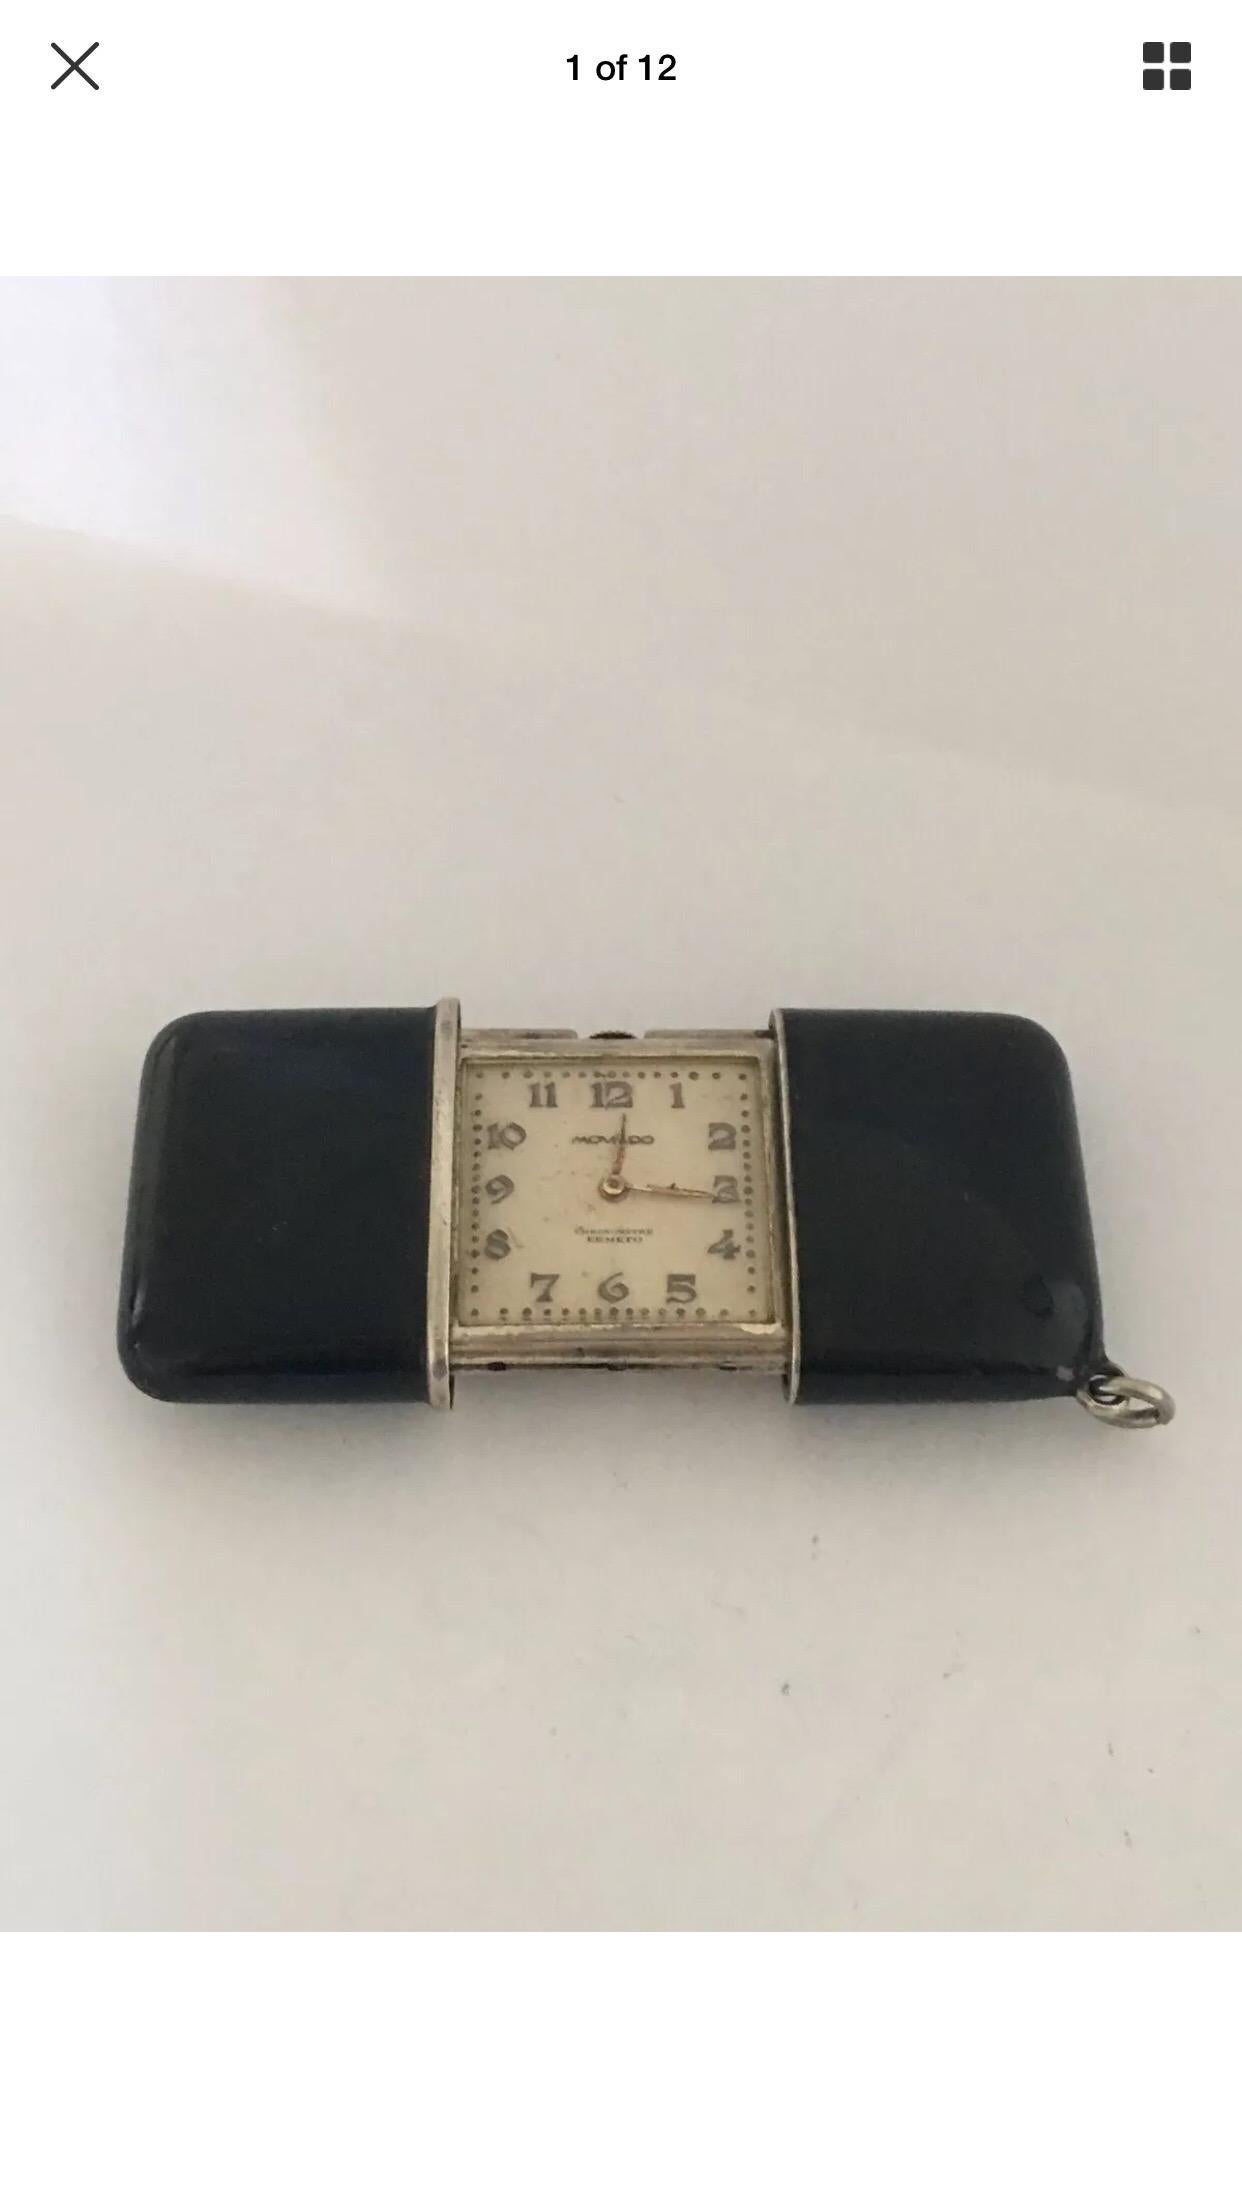 Black Enamel And Silver Movado Chronometre Ermeto Travel Clock.


This rare charming travel clock is in good working condition. Visible signs of ageing and wear wiht some visible chip on the enamel case as shown. Please study the images carefully as